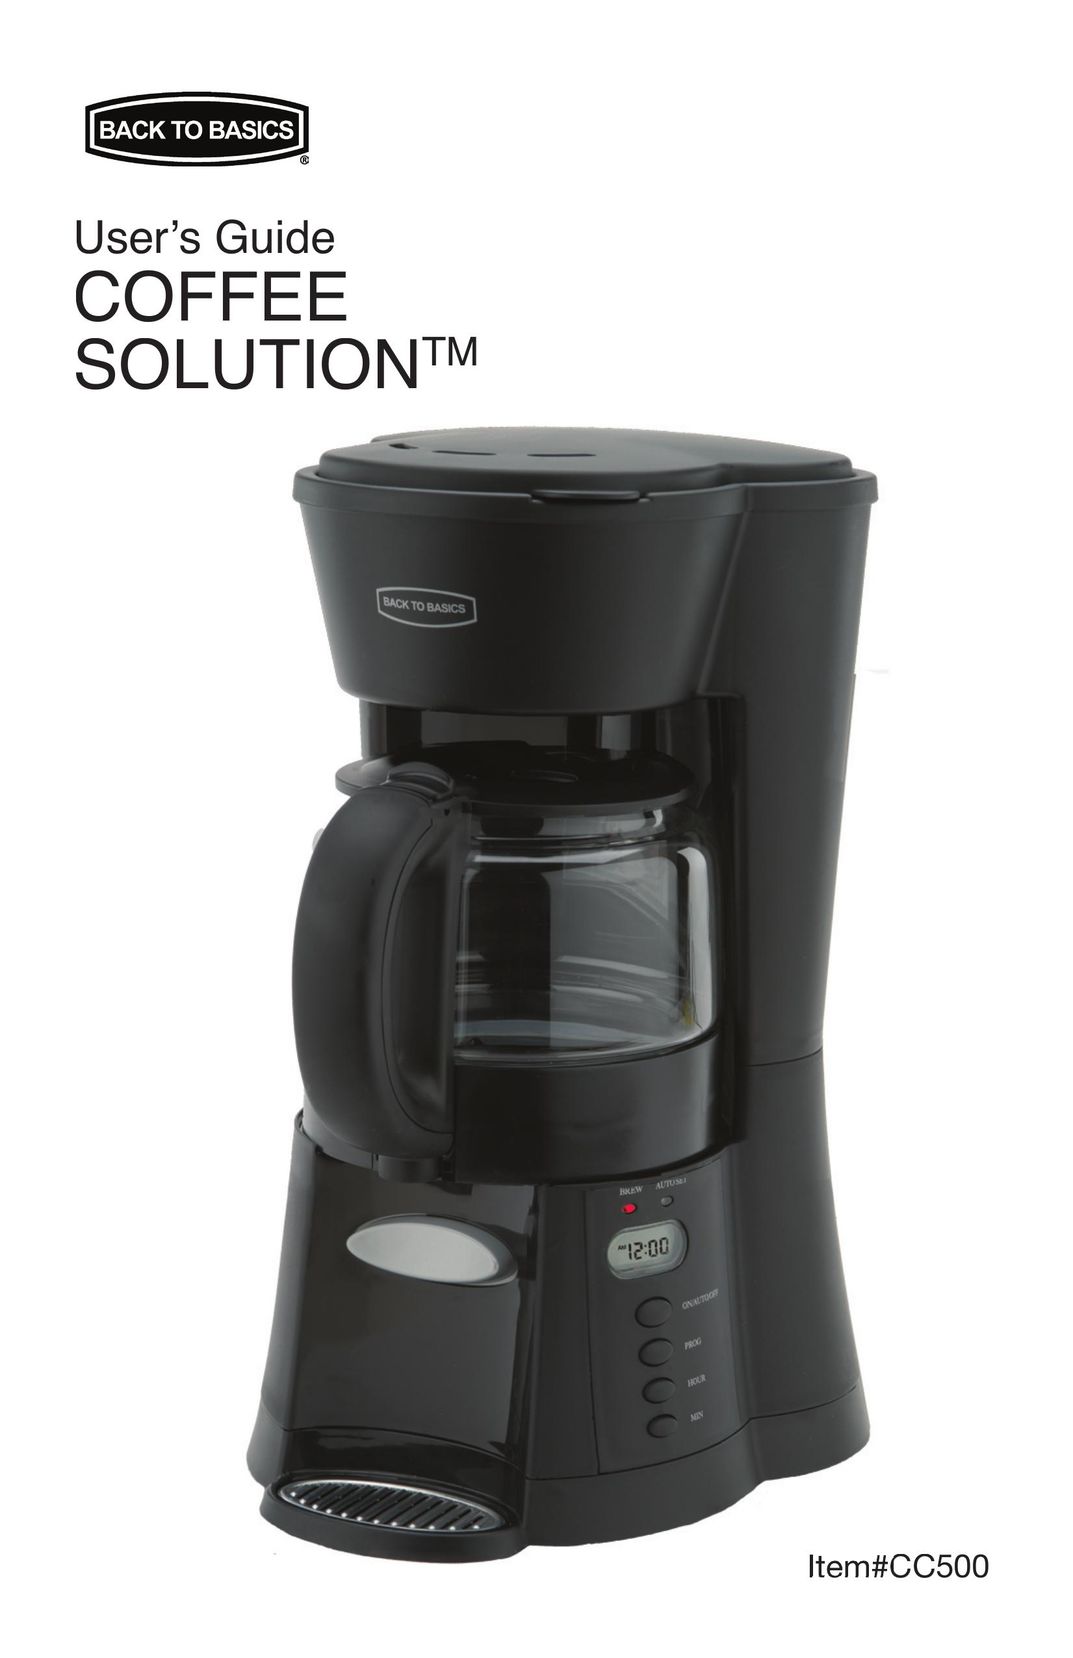 West Bend Back to Basics CC500 Coffeemaker User Manual